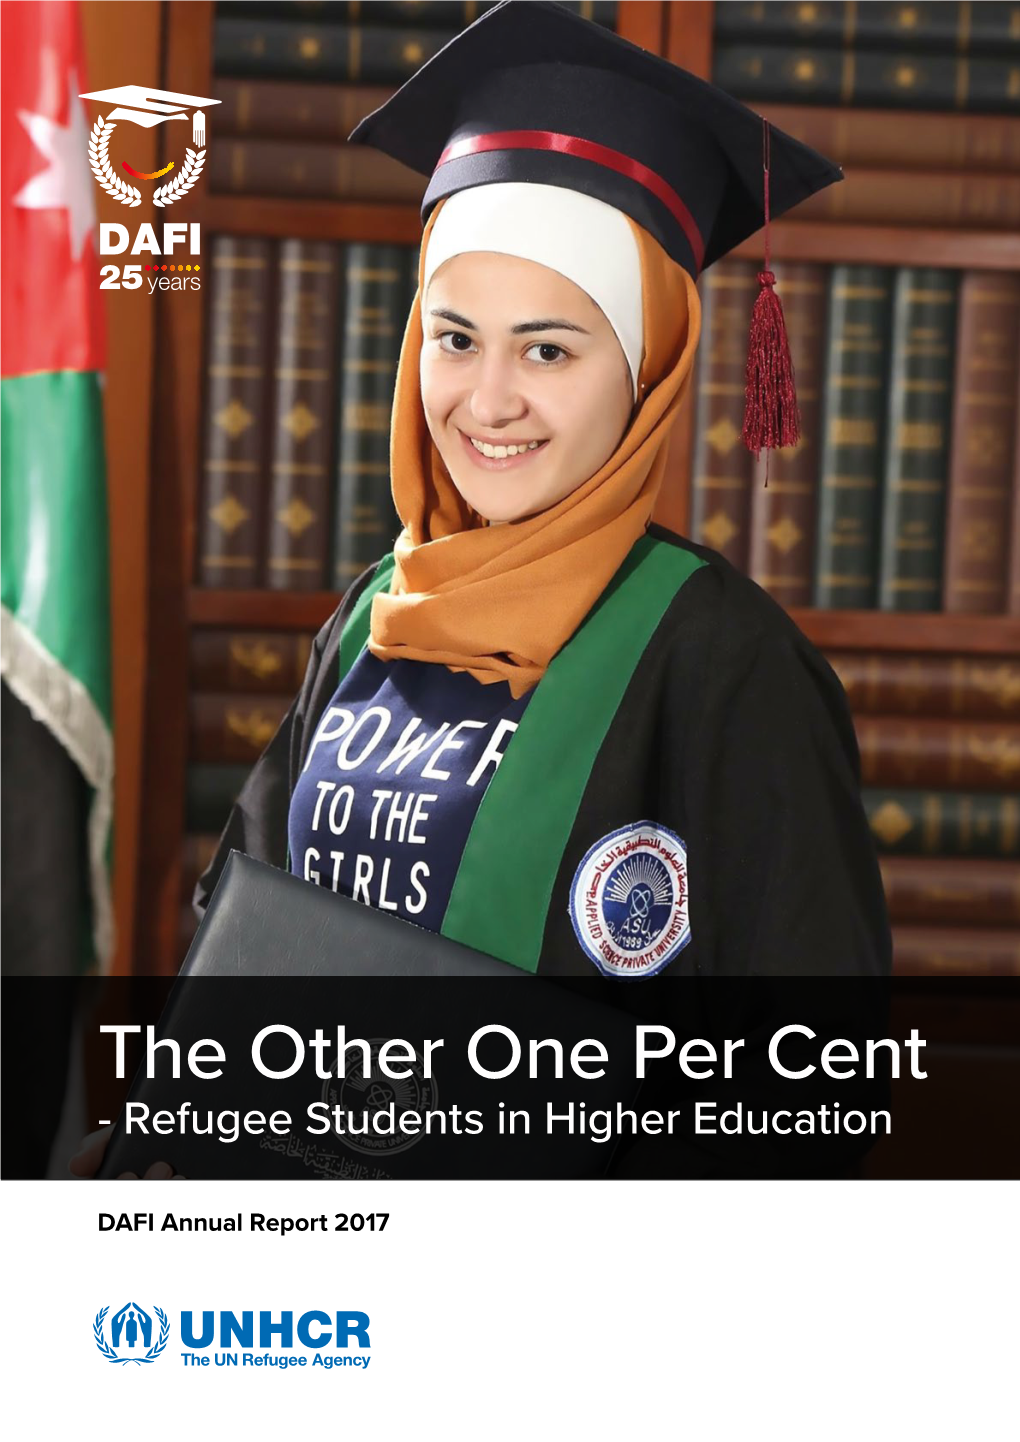 The Other One Per Cent - Refugee Students in Higher Education